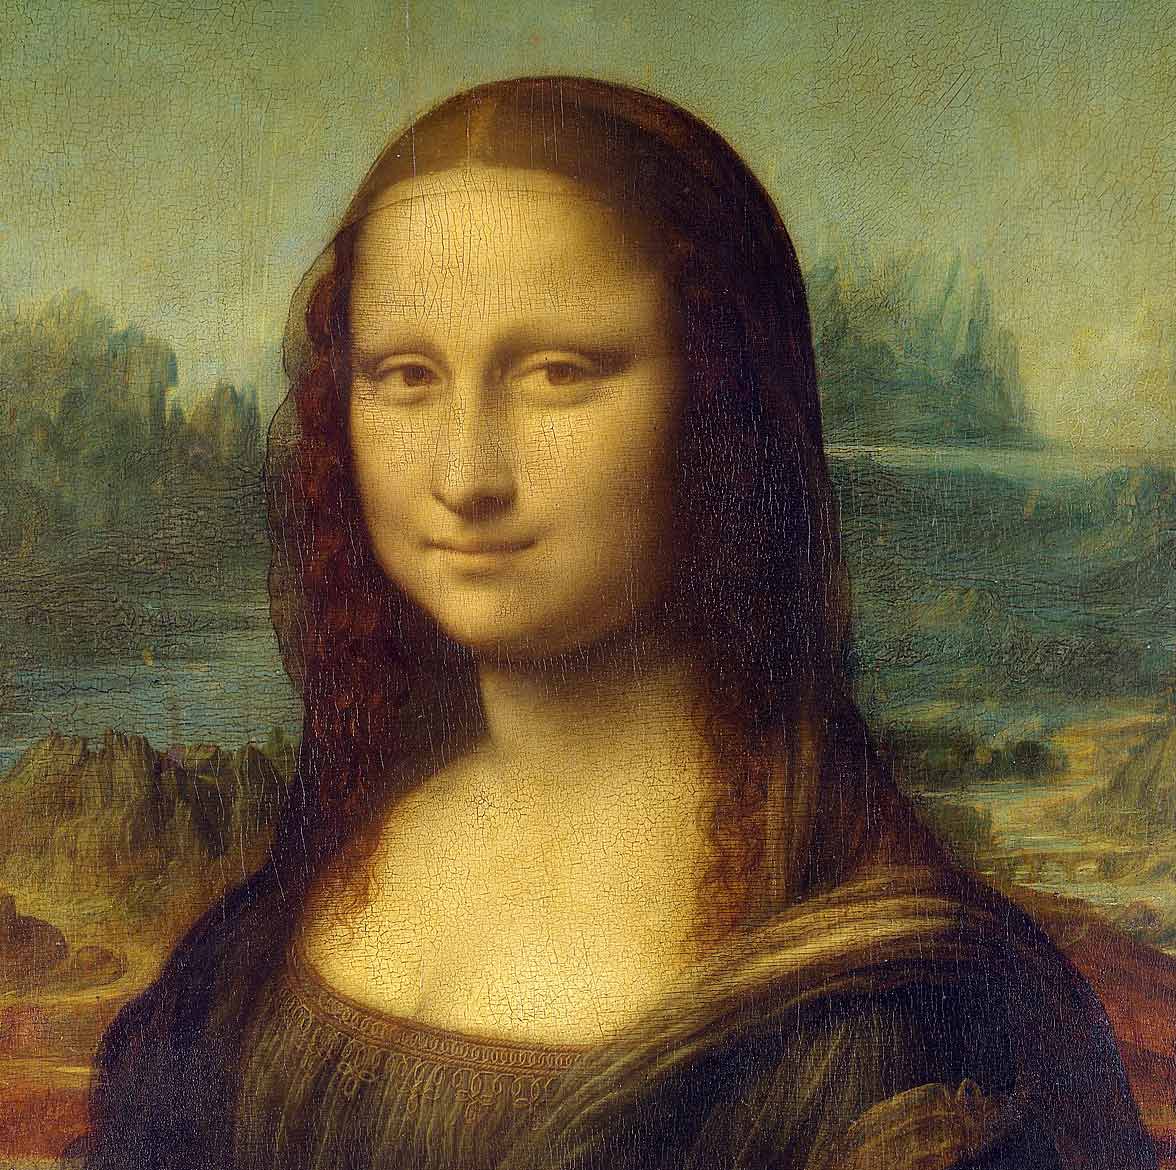 The Curious Tale of the 1911 Theft of the Mona Lisa